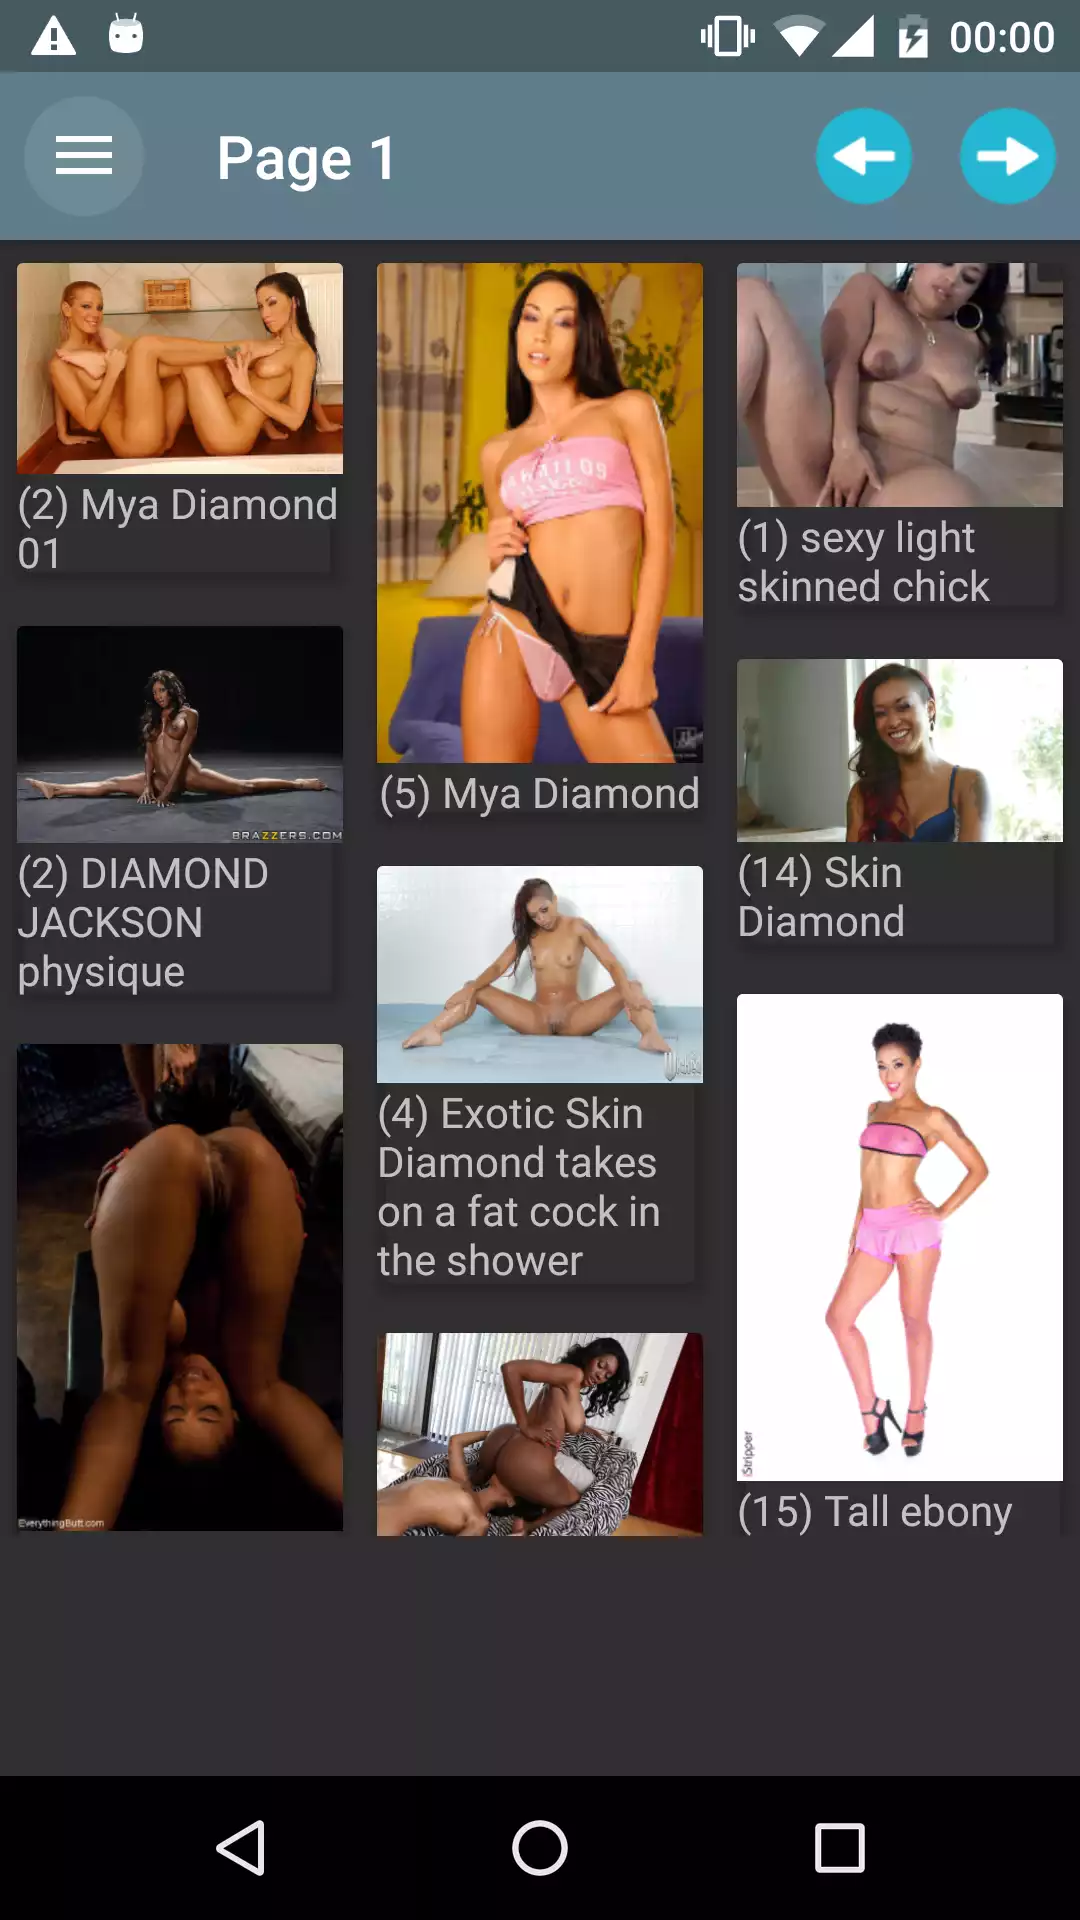 skin-diamond best,how,galleries,picturd,hentai,image,pics,porn,pic,photos,erotic,sexy,sex,nhentai,download,wallpapers,app,apk,updates,backgrounds,gallery,picture